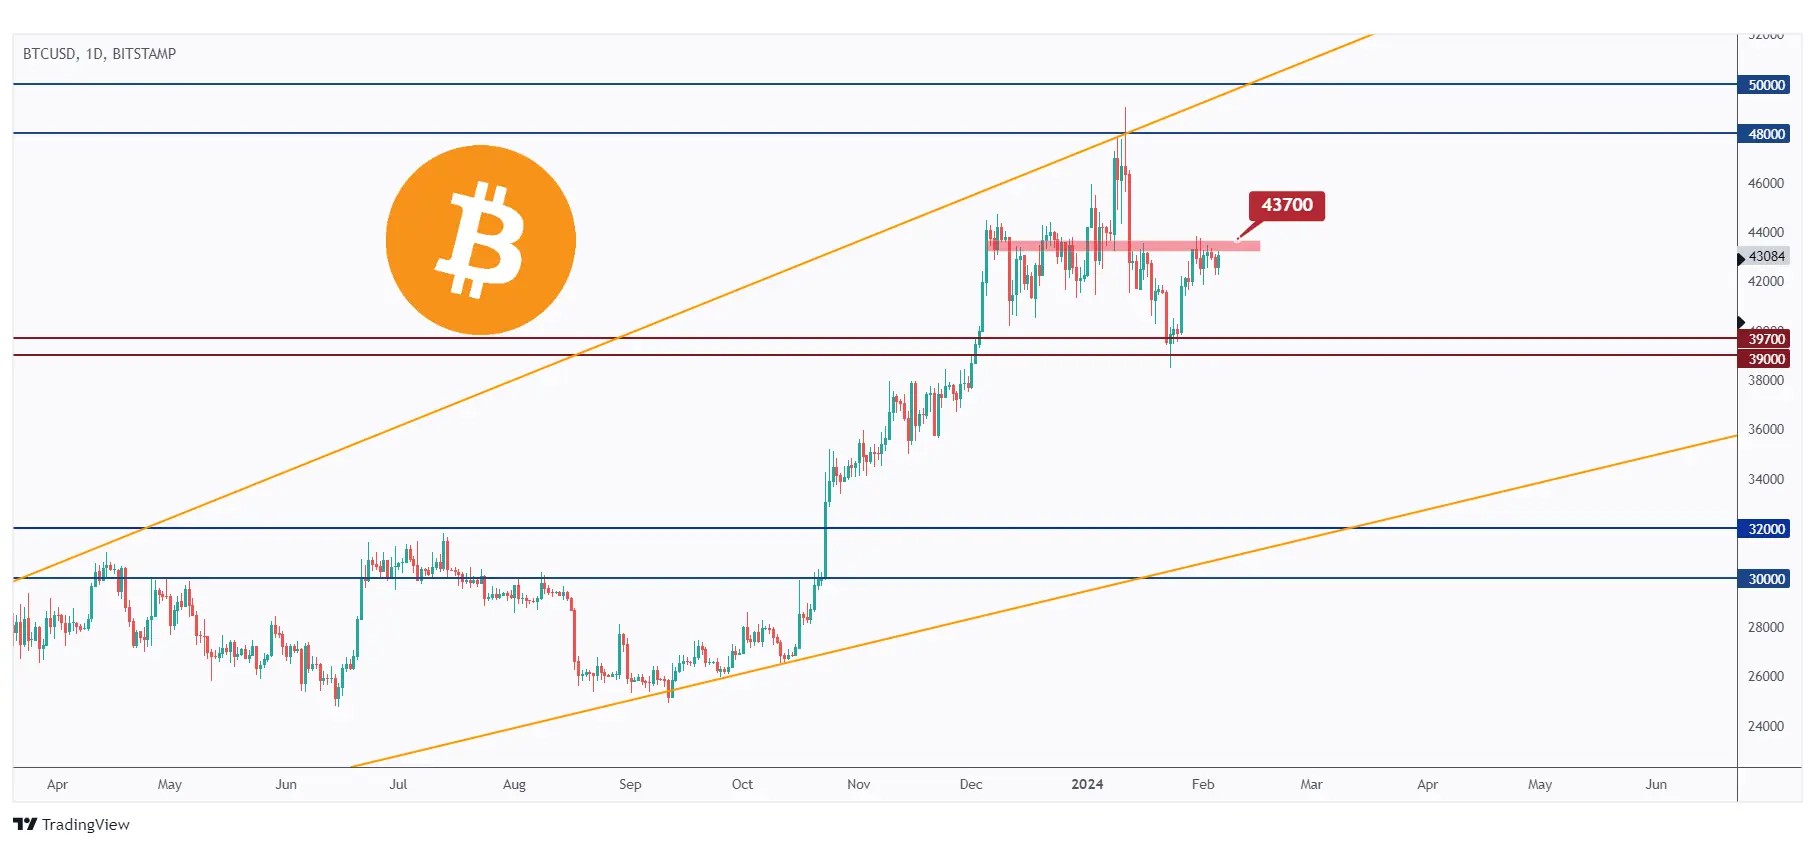 BTC daily chart approaching a major high and structure at $43,700.